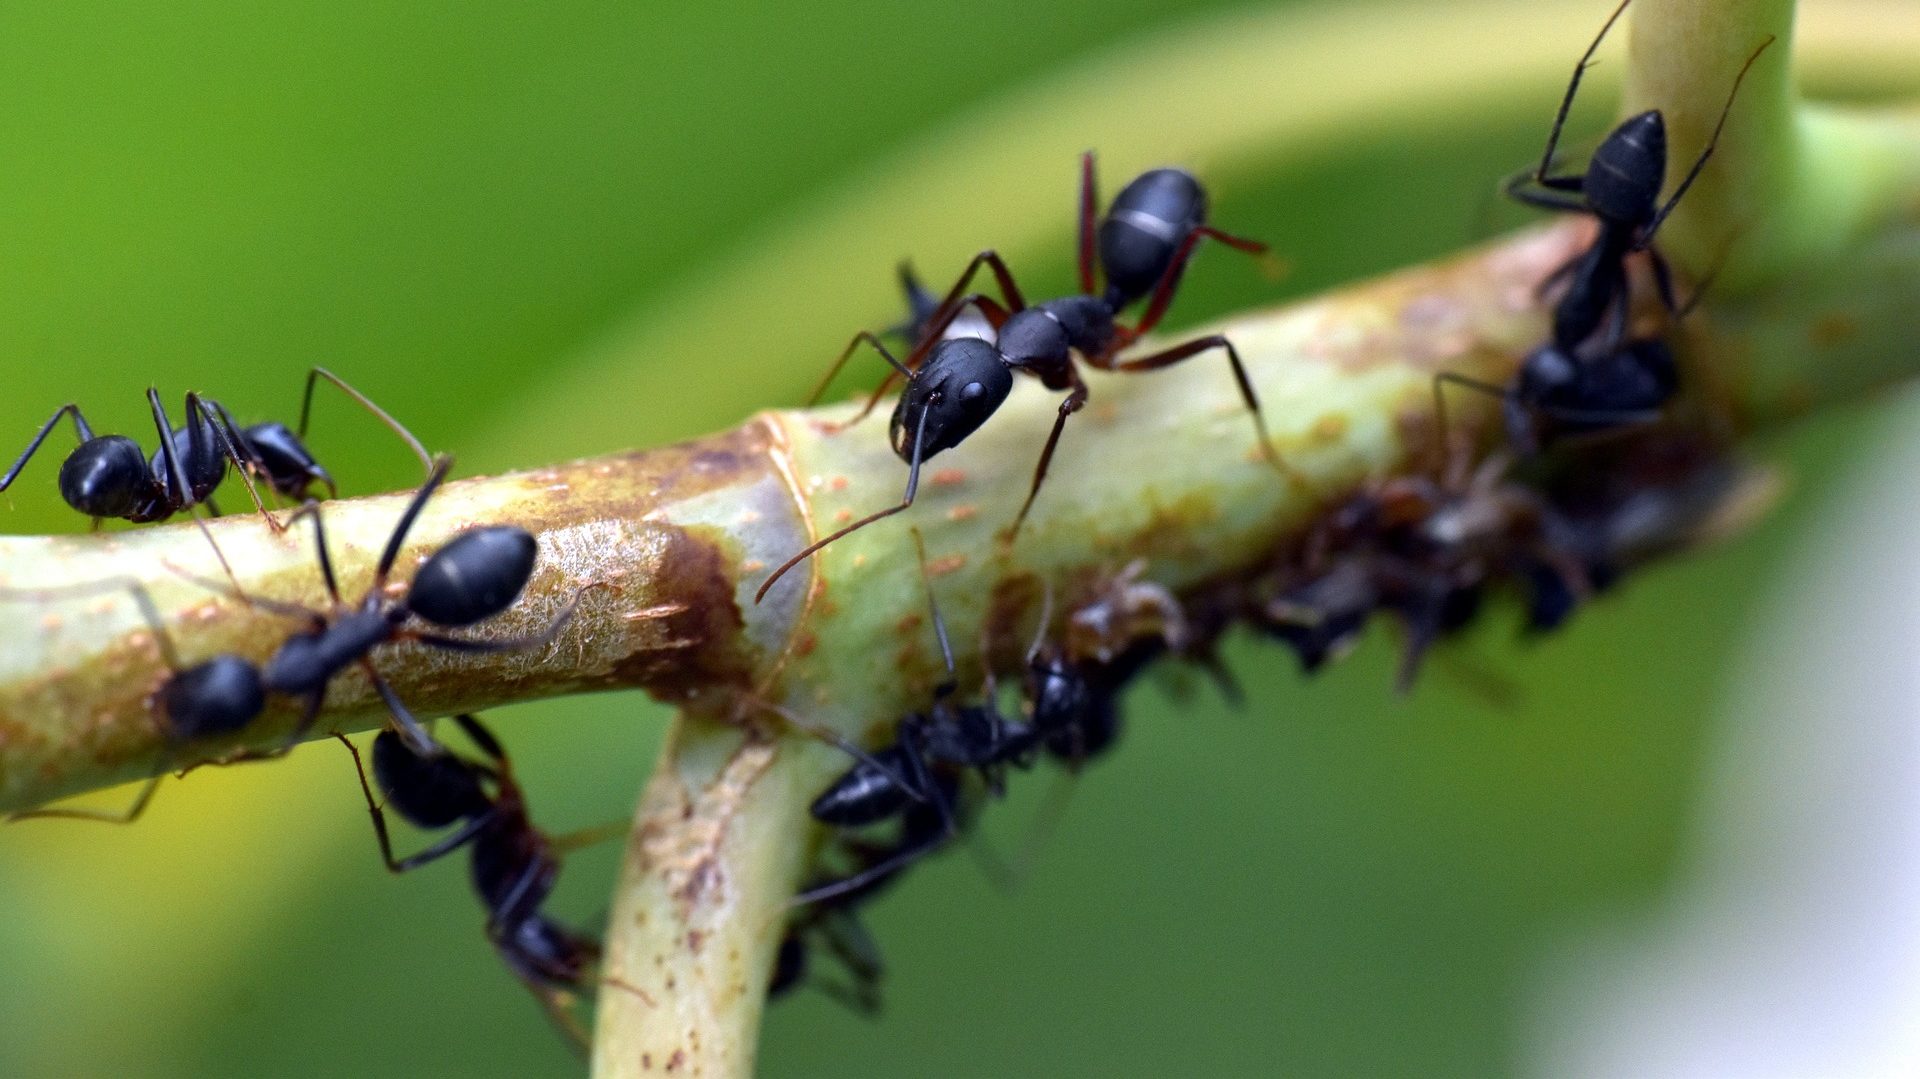 In Social Insects, Researchers Find Hints for Controlling Disease